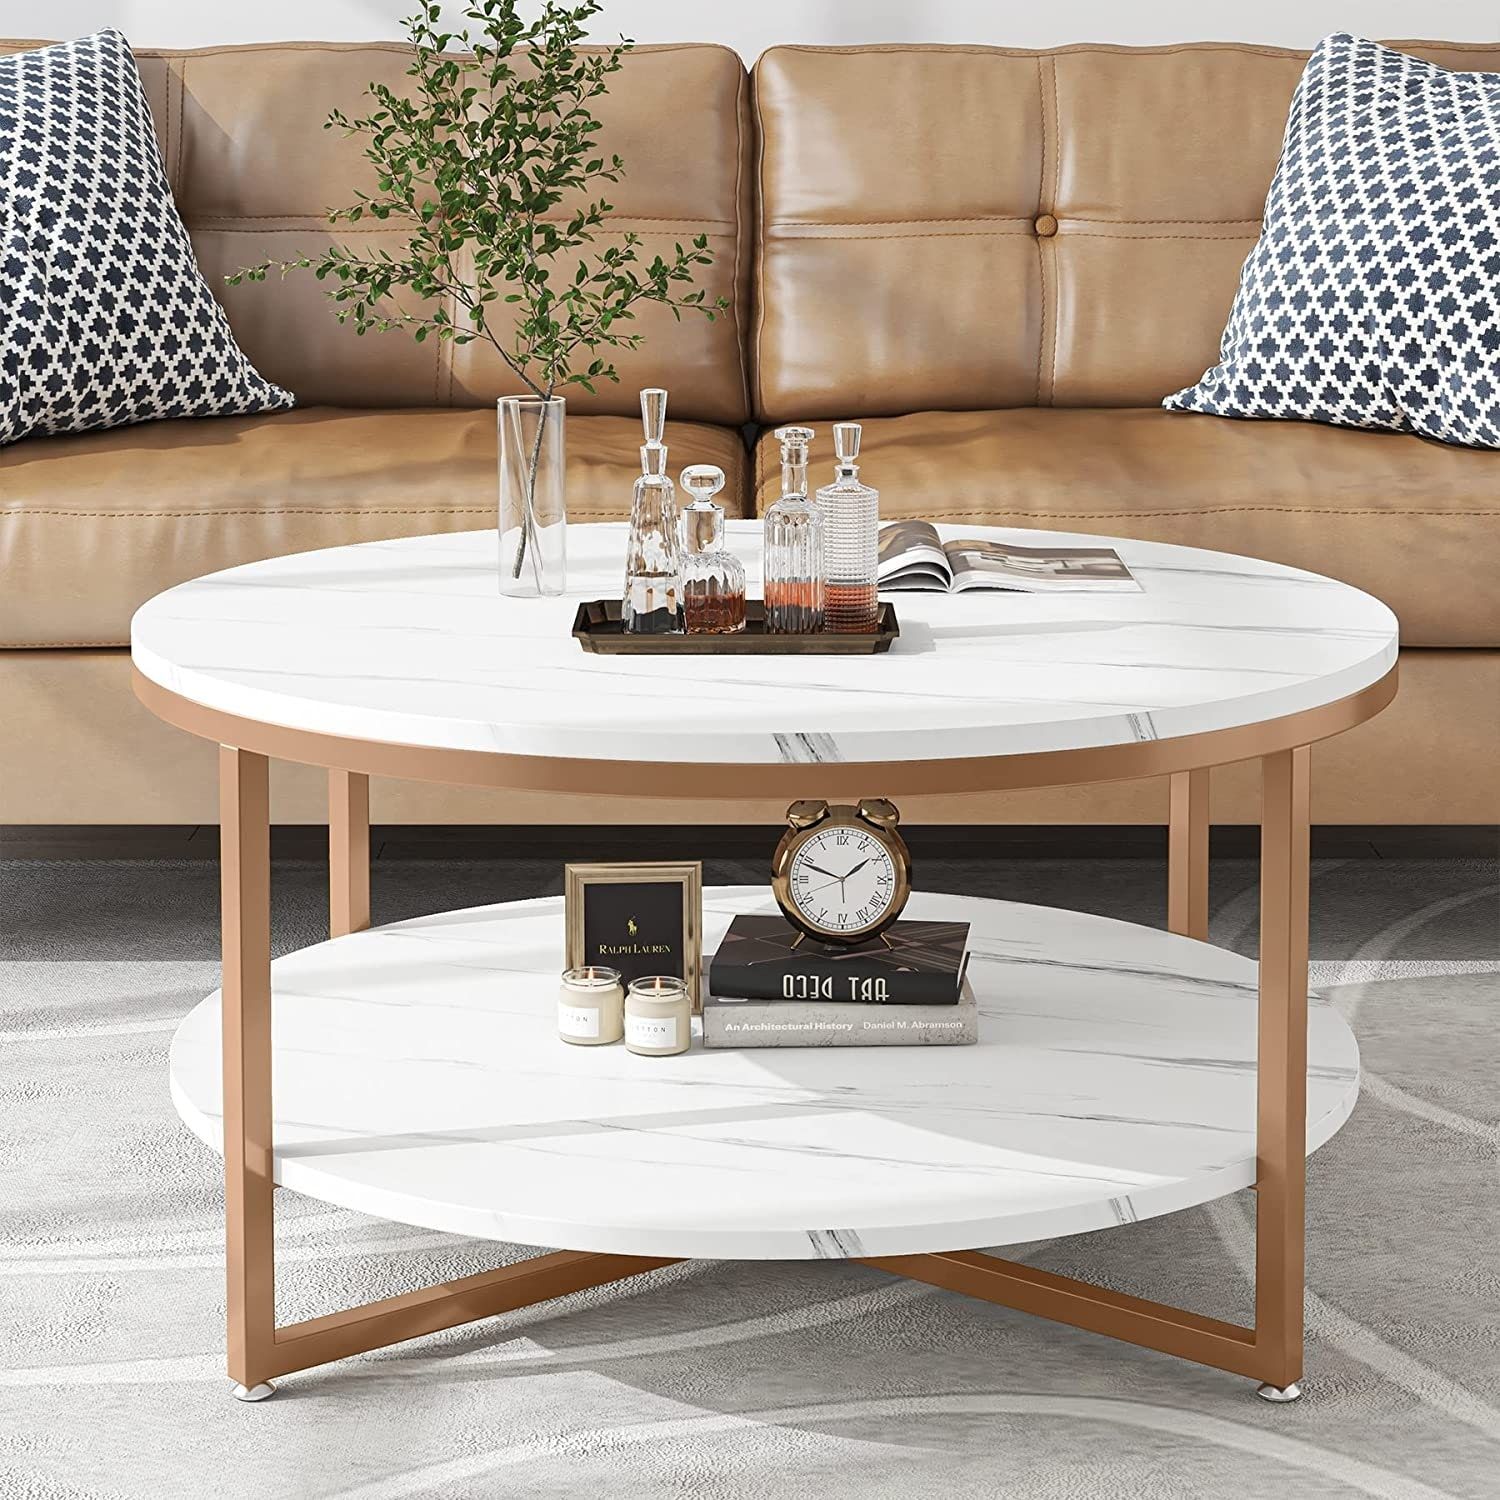 Two Tier Round Faux Marble Modern Coffee Table With Metal Legs And Open  Storage Shelf For Living Room, White Gold – Bed Bath & Beyond – 37593828 Pertaining To Coffee Tables With Open Storage Shelves (View 4 of 15)